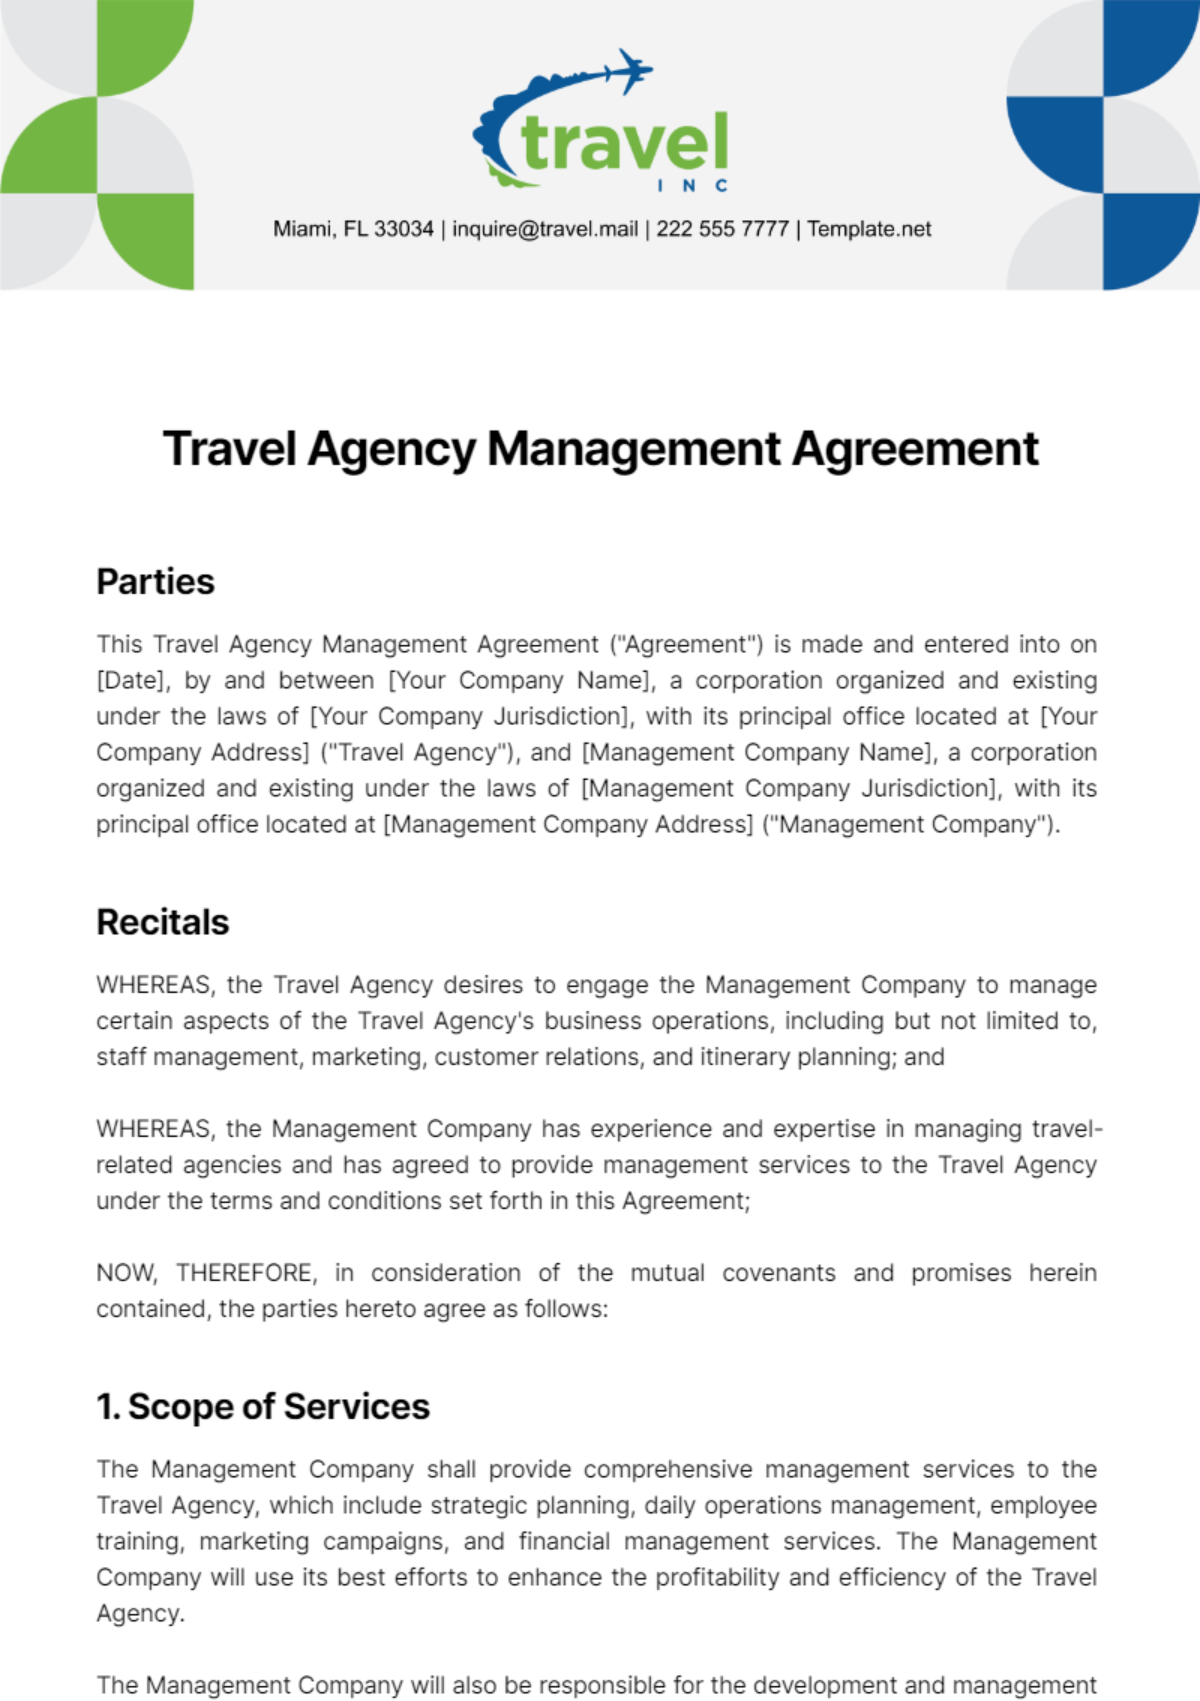 Free Travel Agency Management Agreement Template